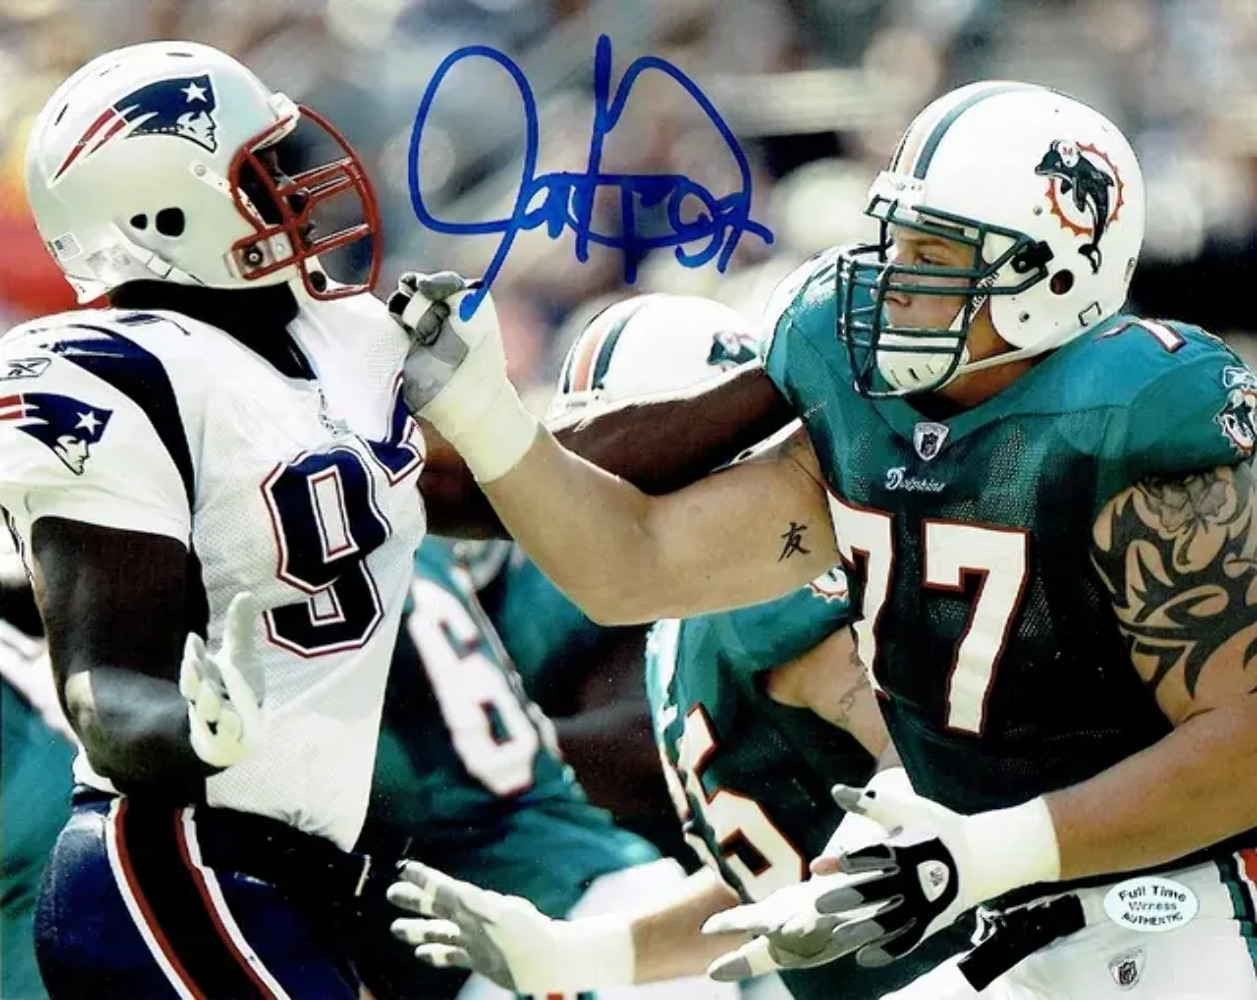 Jarvis Green New England Patriots Autographed 8x10 Photo Full Time coa